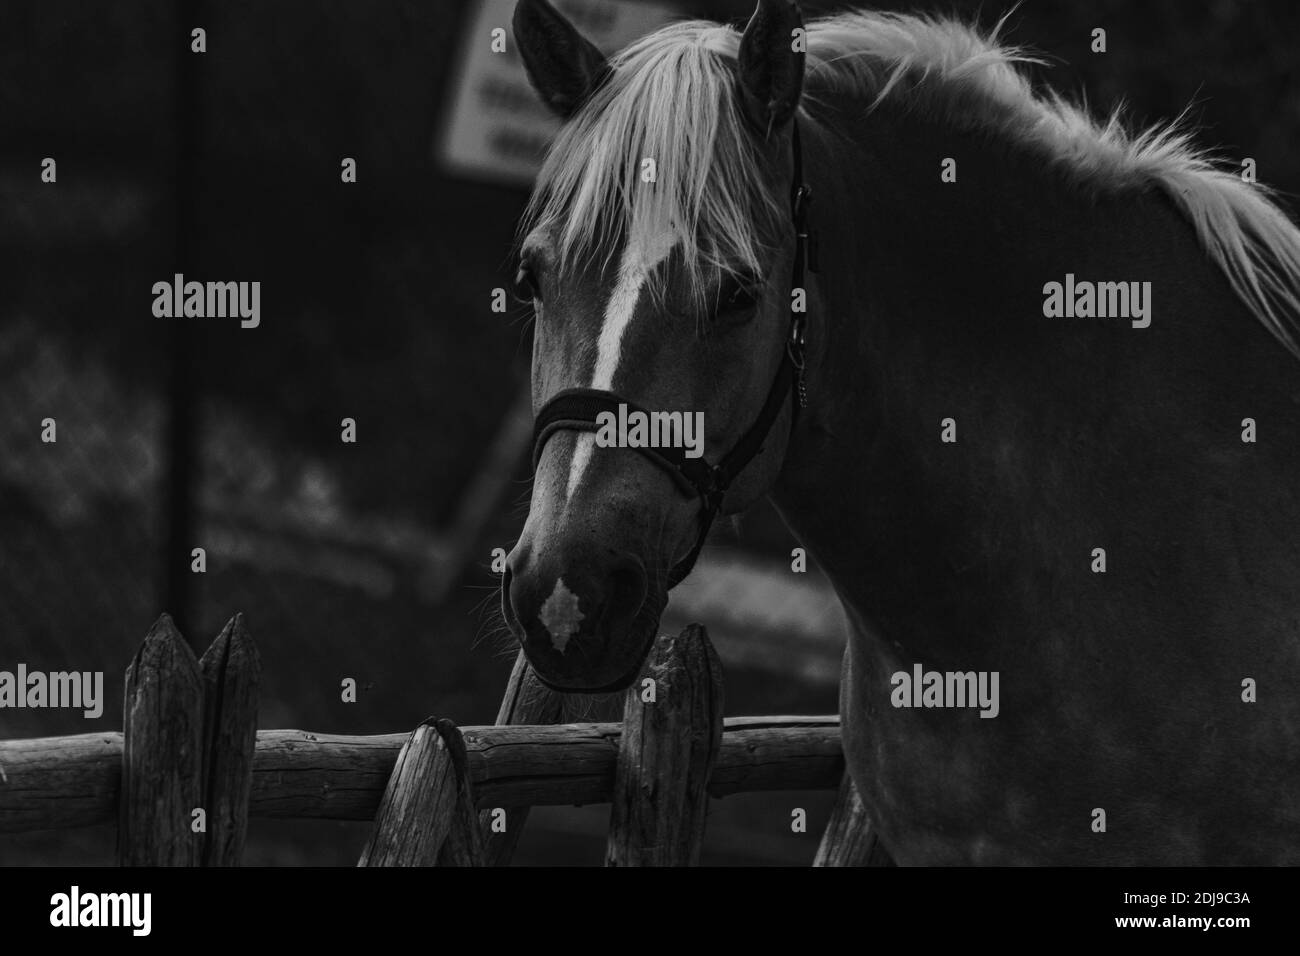 A grayscale closeup portrait of a beautiful horse in a bridle standing near a wooden fence Stock Photo